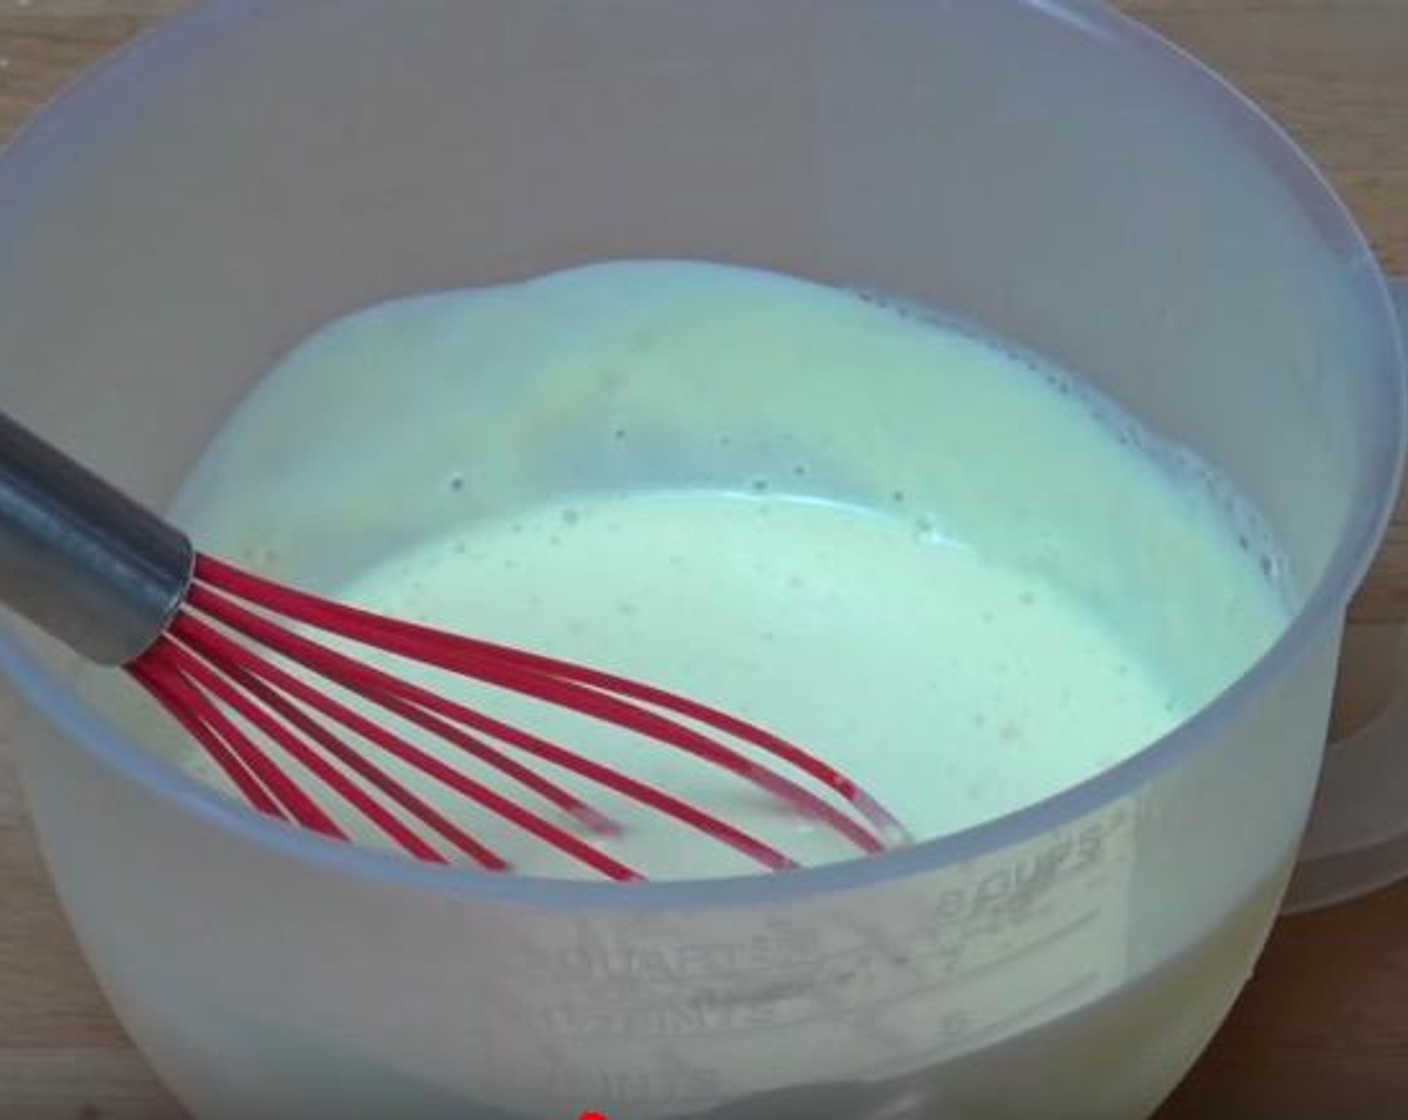 step 2 In a mixing jug, add the Eggs (3). Lightly beat until gooey. Add Parmesan Cheese (1 cup) and Cream (1 cup). Mix together.